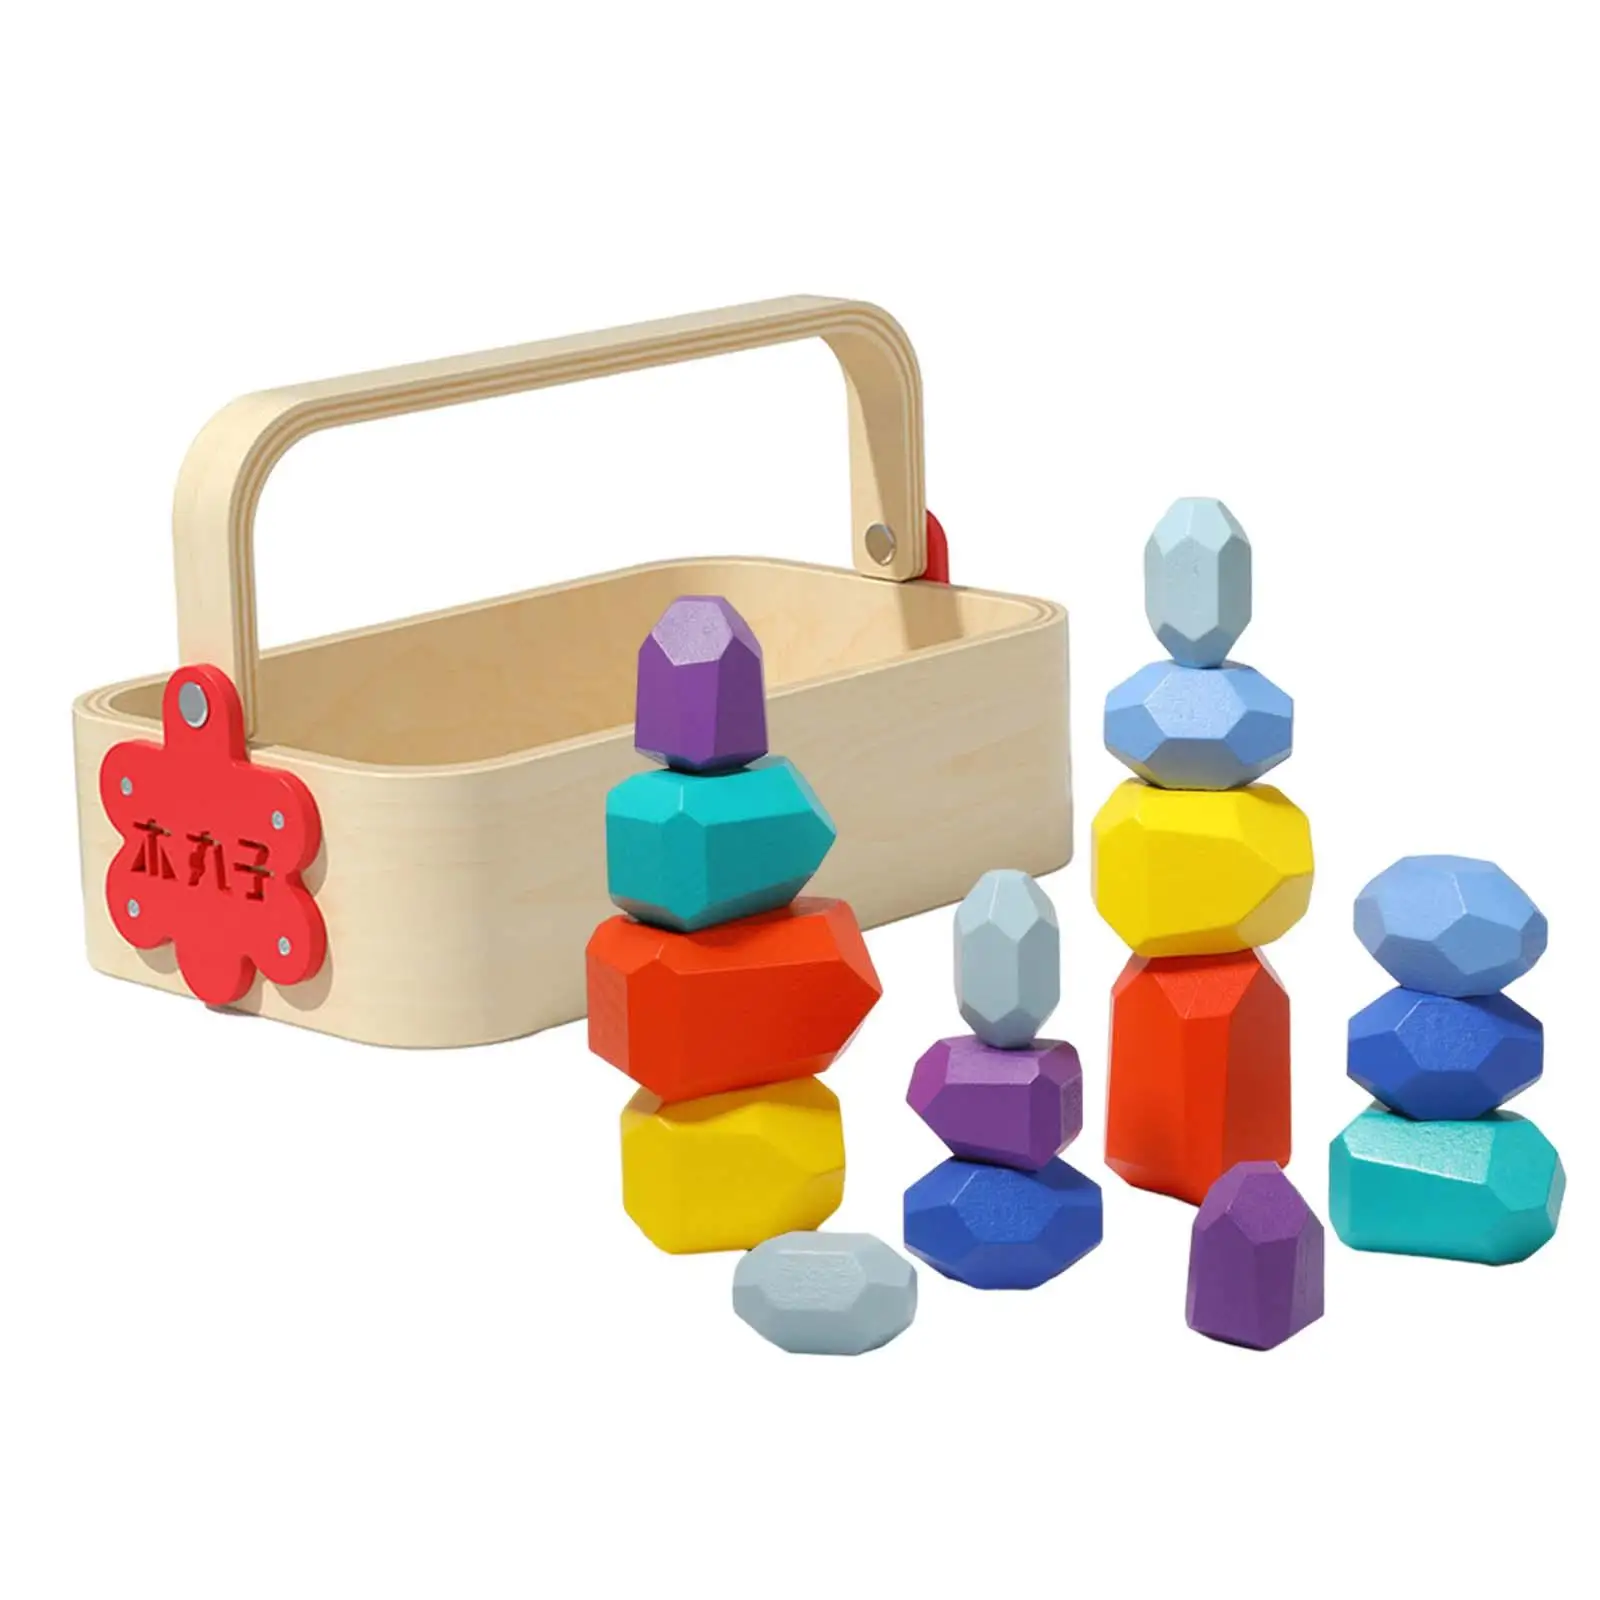 Stacking Blocks Rocks Wooden Balance Training Toys Hands on Montessori Toys Colorful Building Blocks for Children Girls Gifts